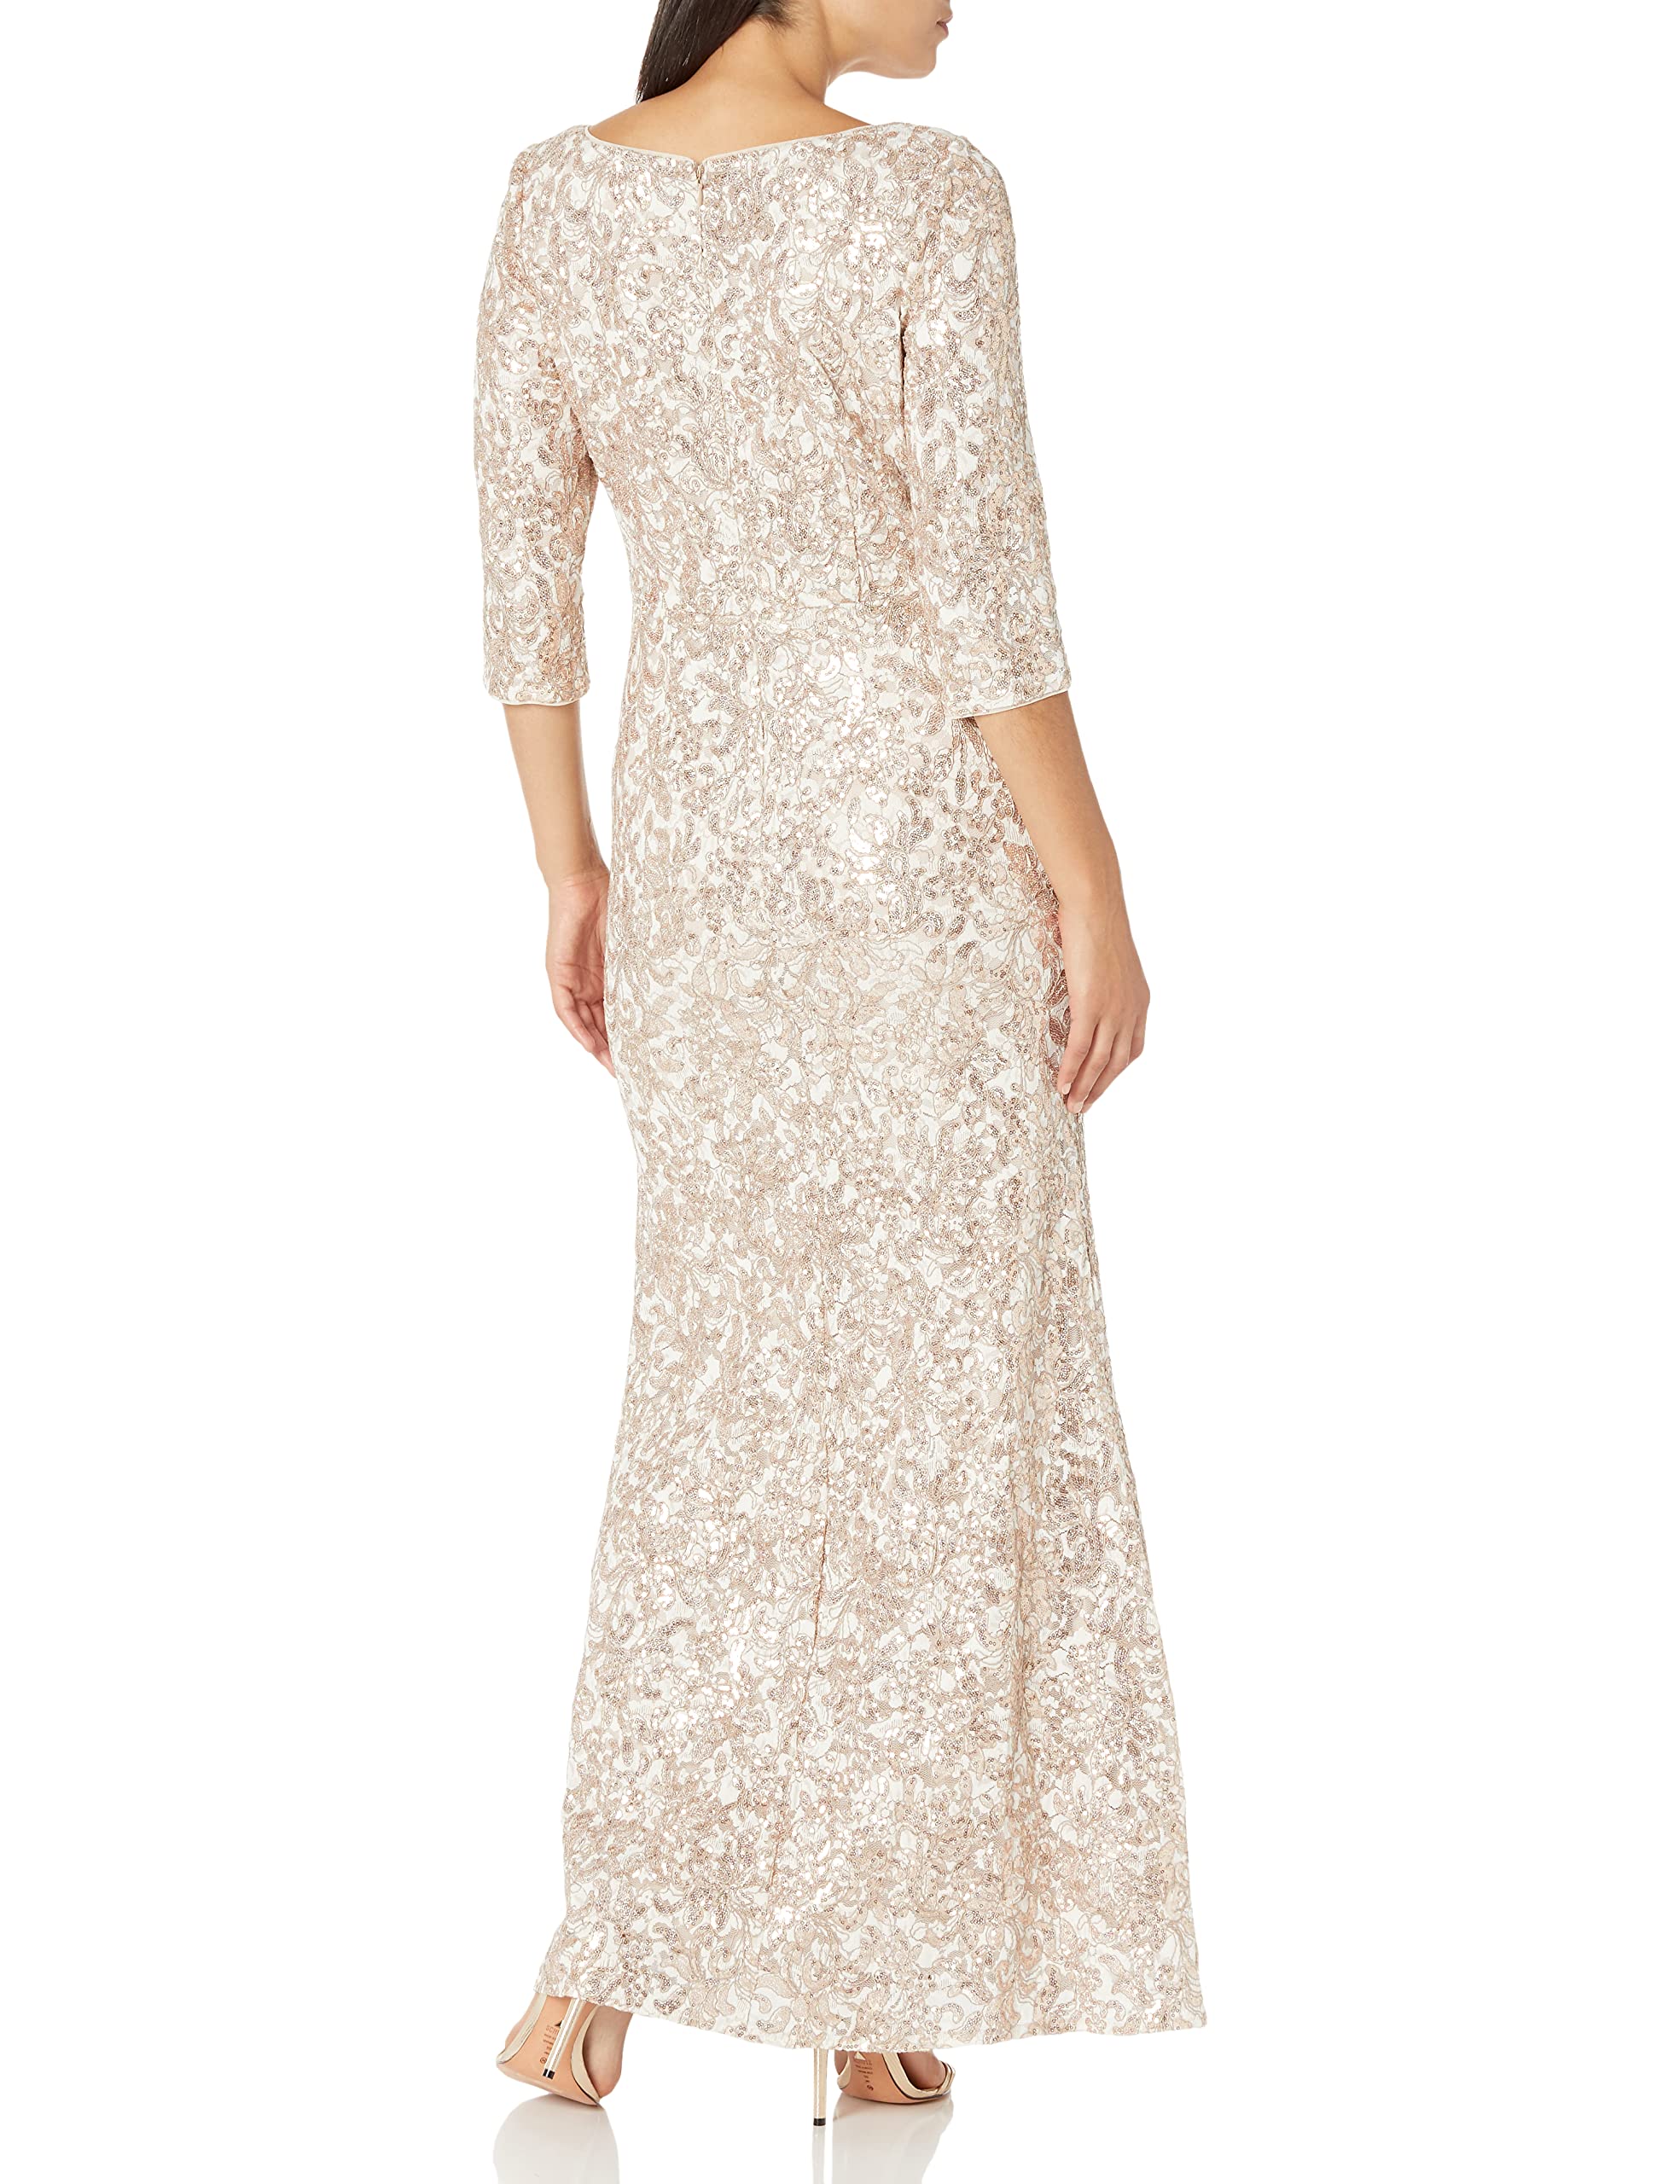 Alex Evenings Women's Long Sequin Dresses with ¾ Sleeves